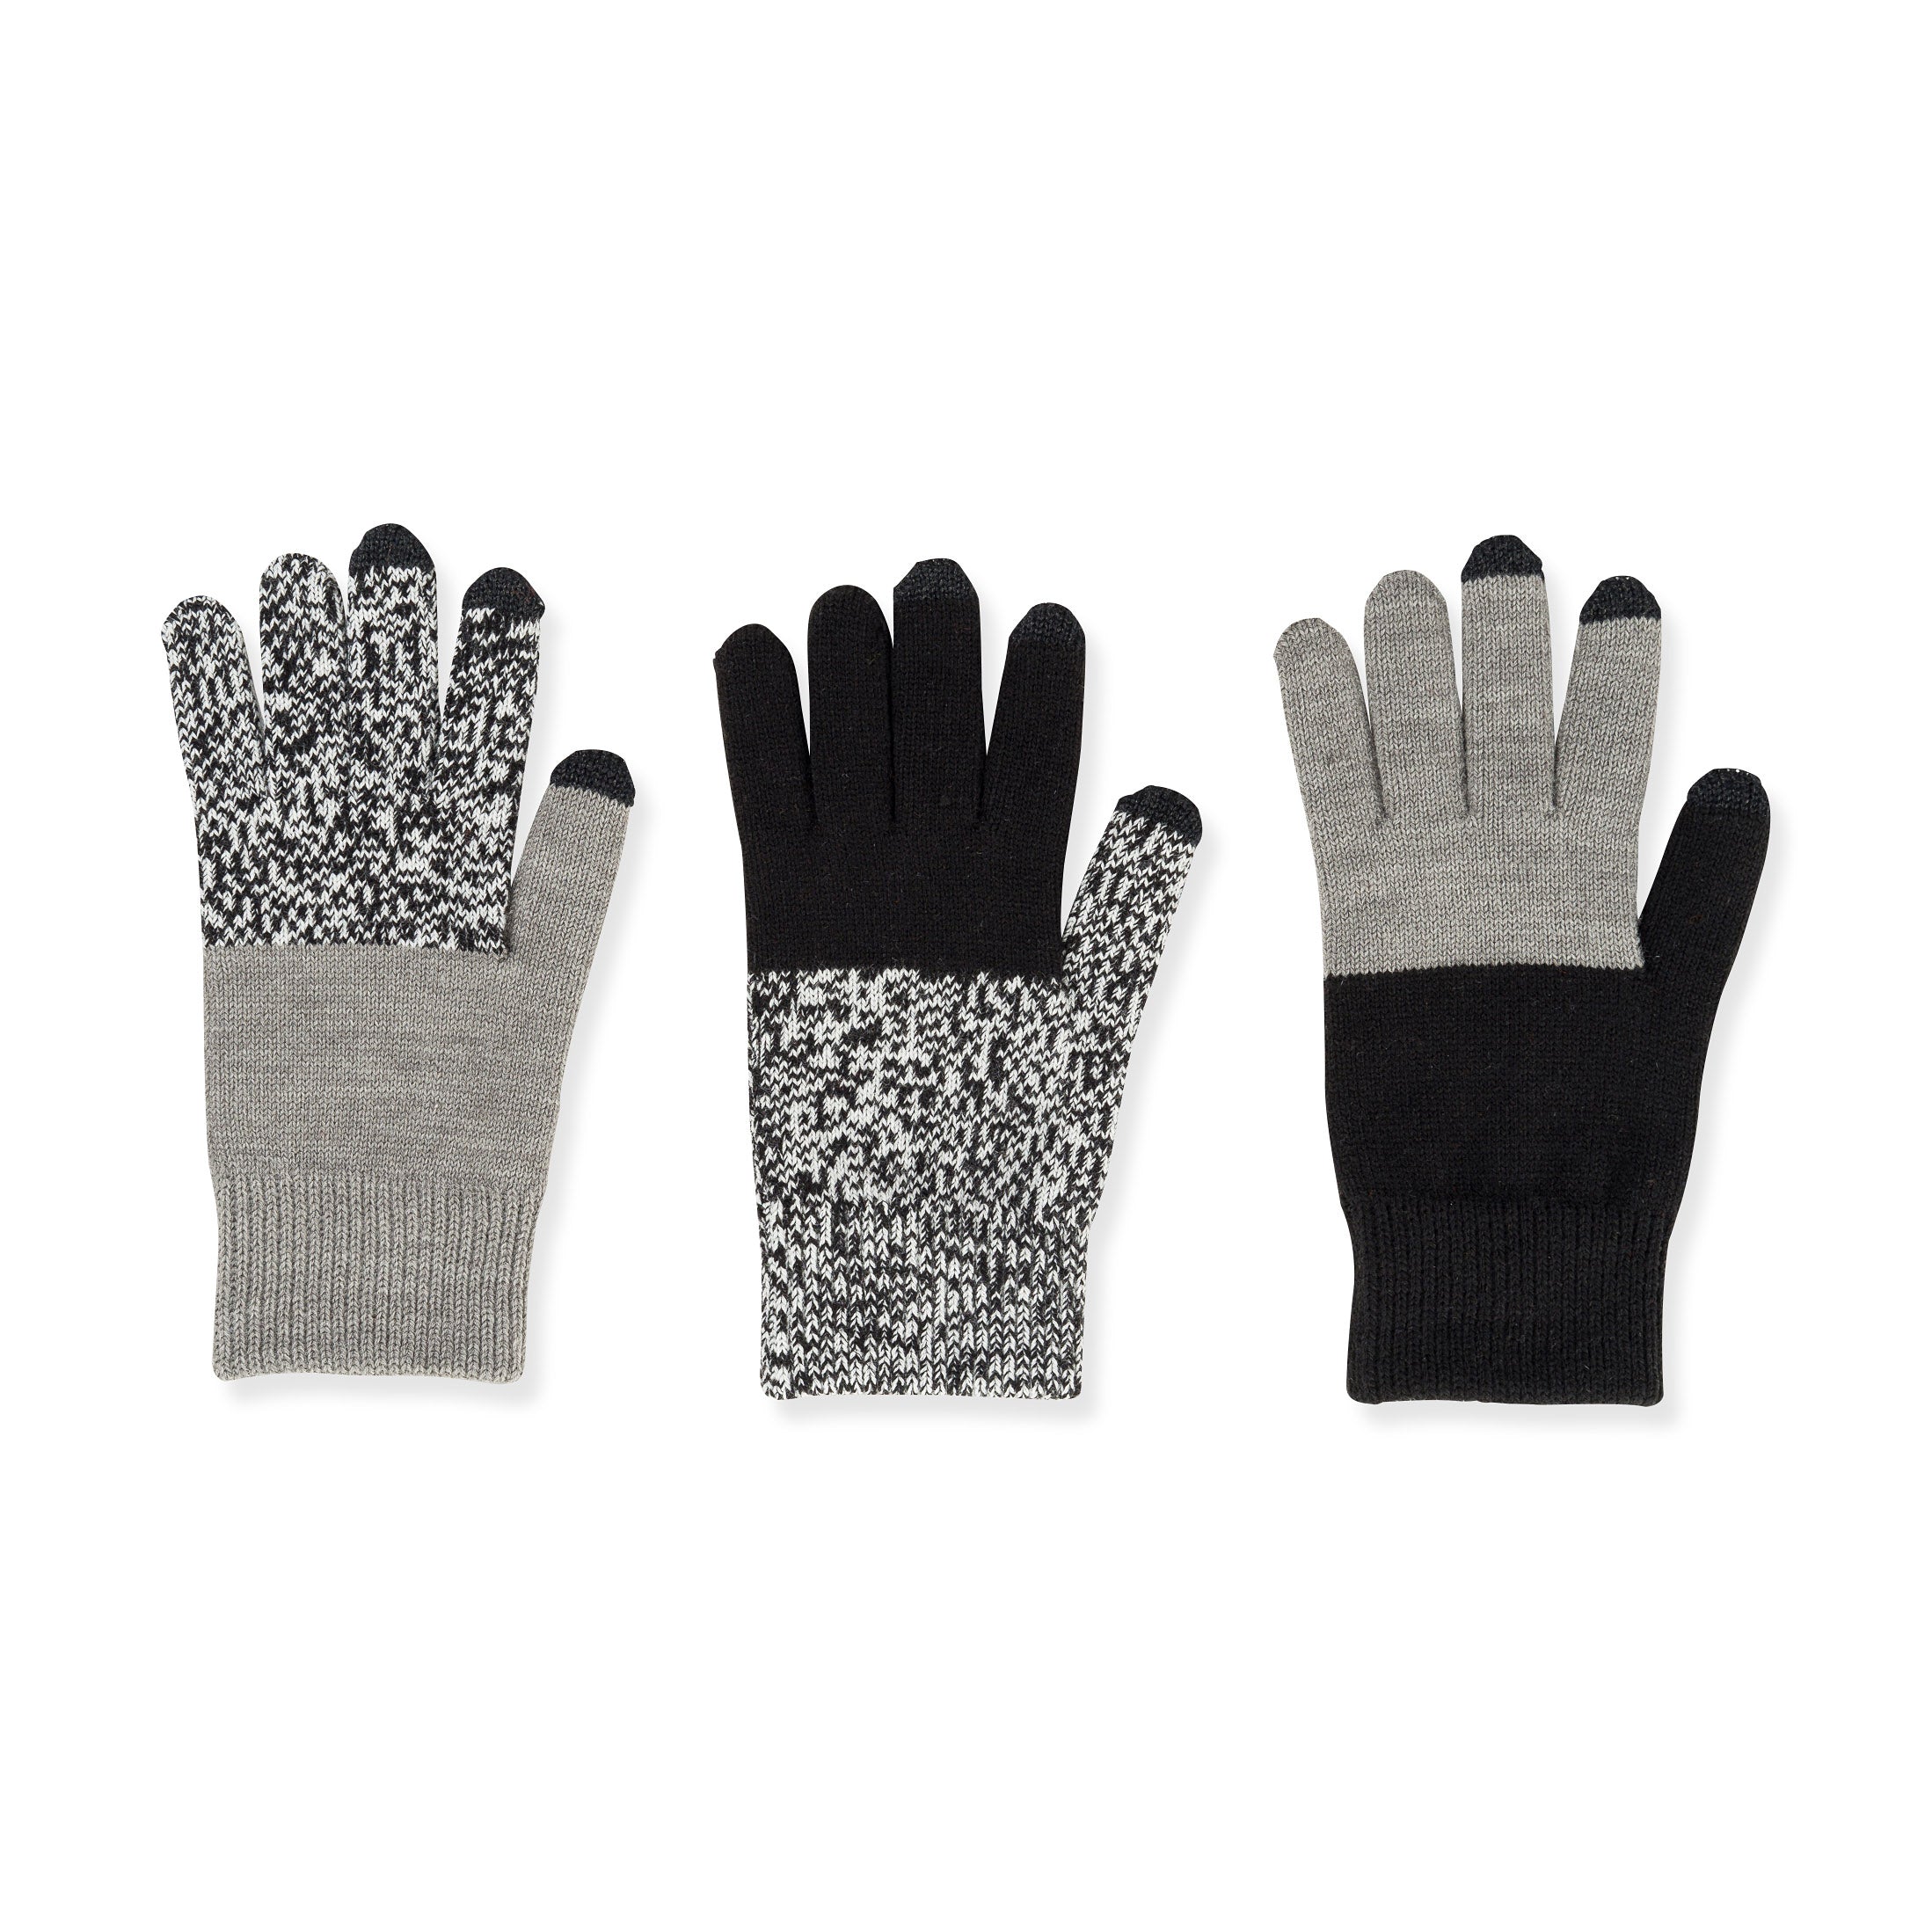 Pair & a Spare Colorblock Black Store MoMA Design - Gloves – Gray Touchscreen